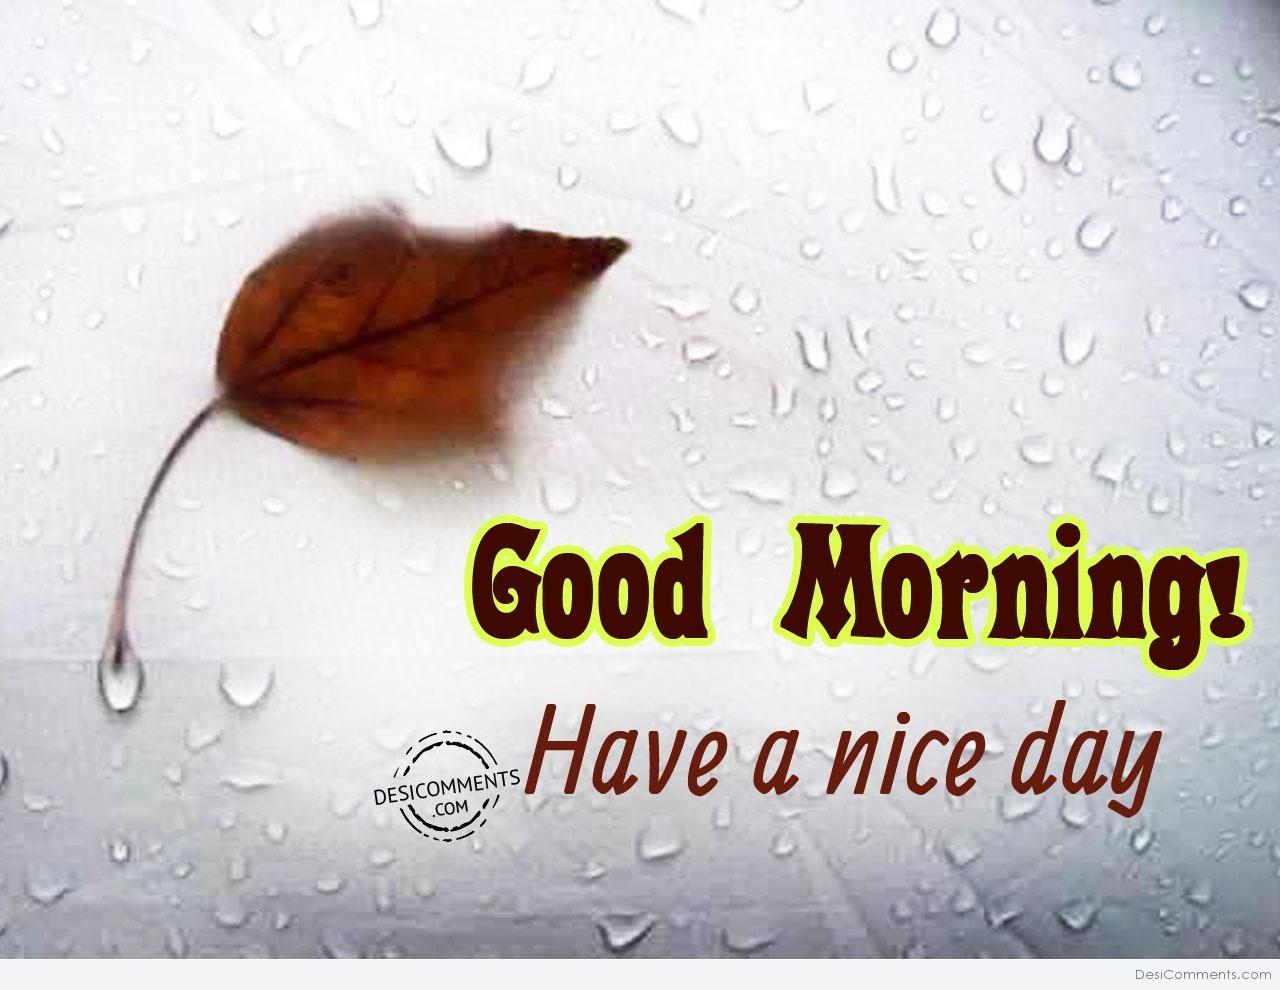 Good Morning – Have A Nice Day - DesiComments.com